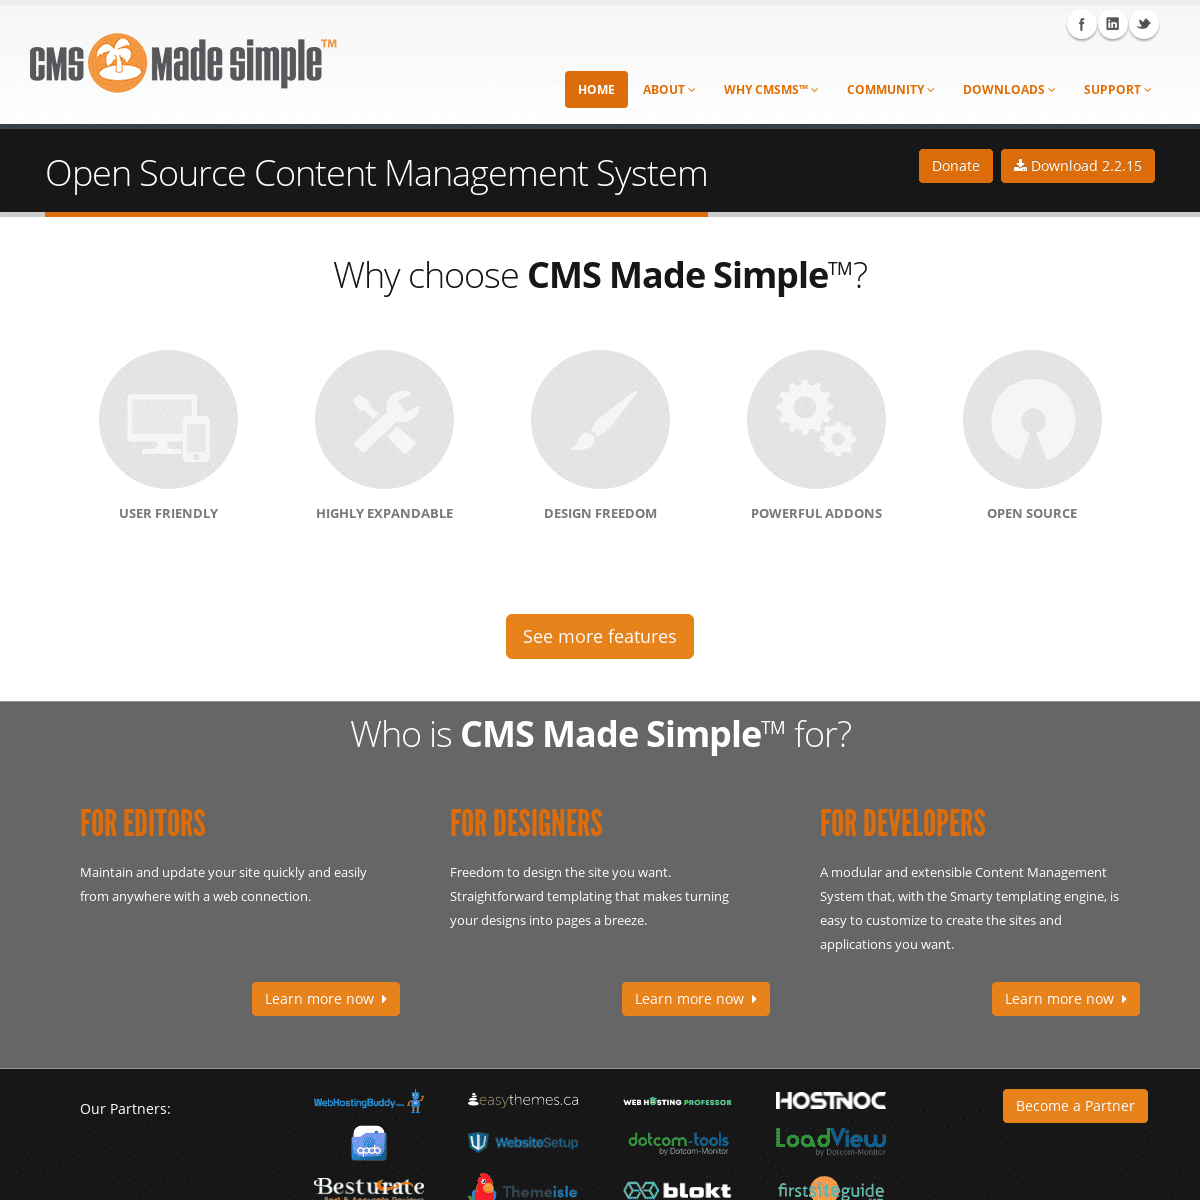 A complete backup of https://cmsmadesimple.org